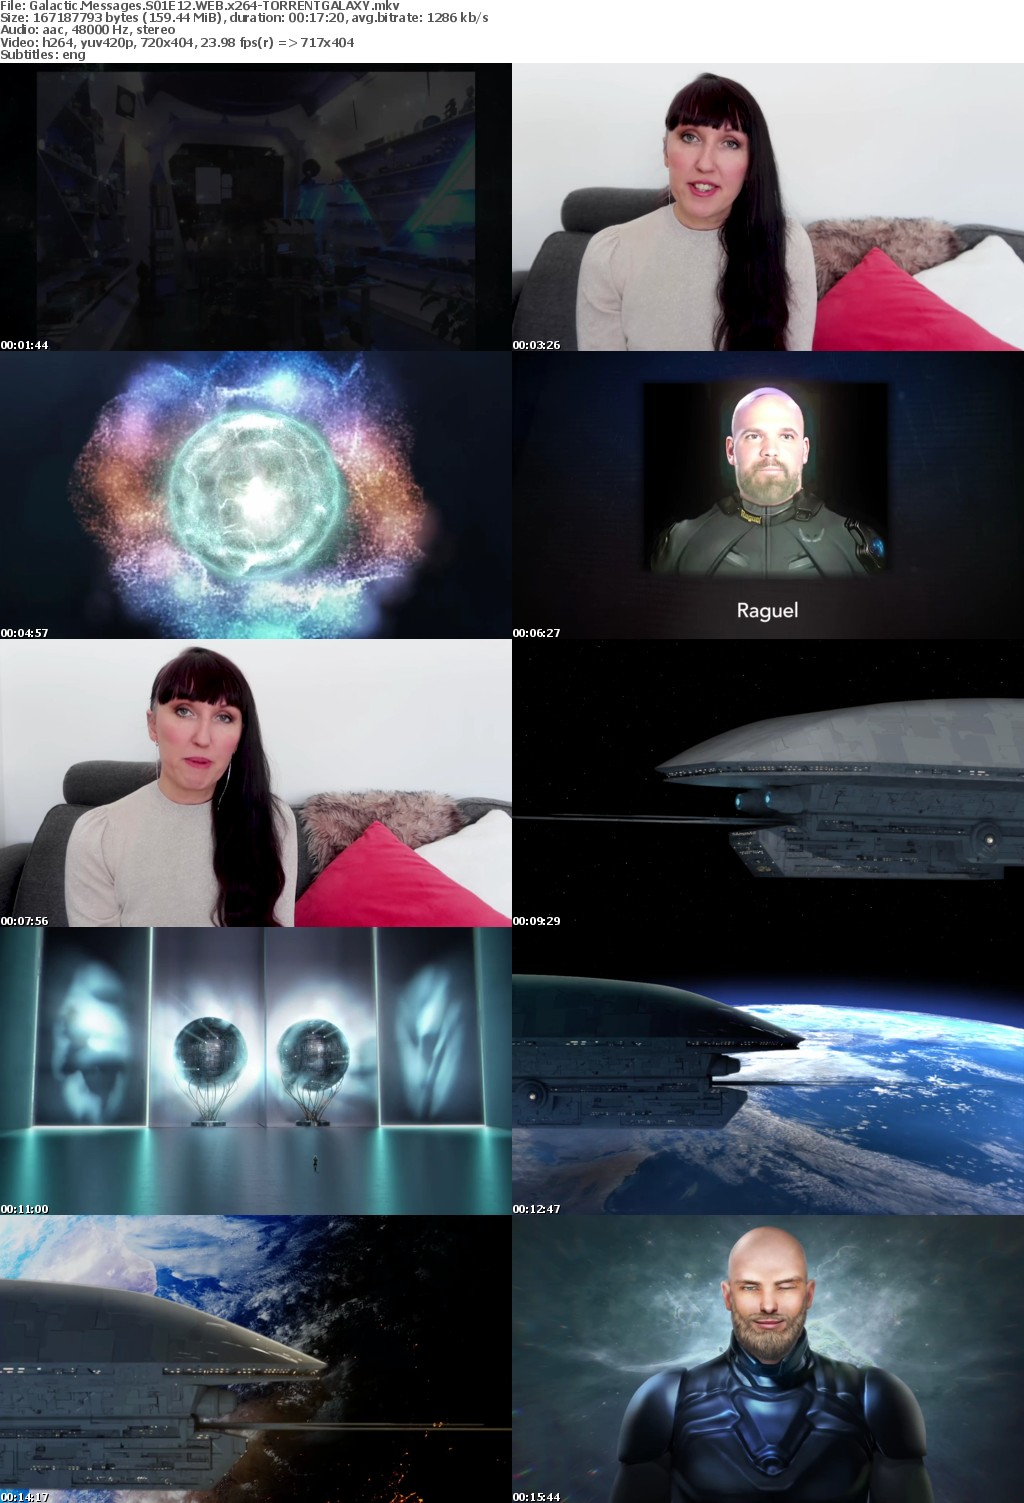 Galactic Messages S01E12 WEB x264-GALAXY